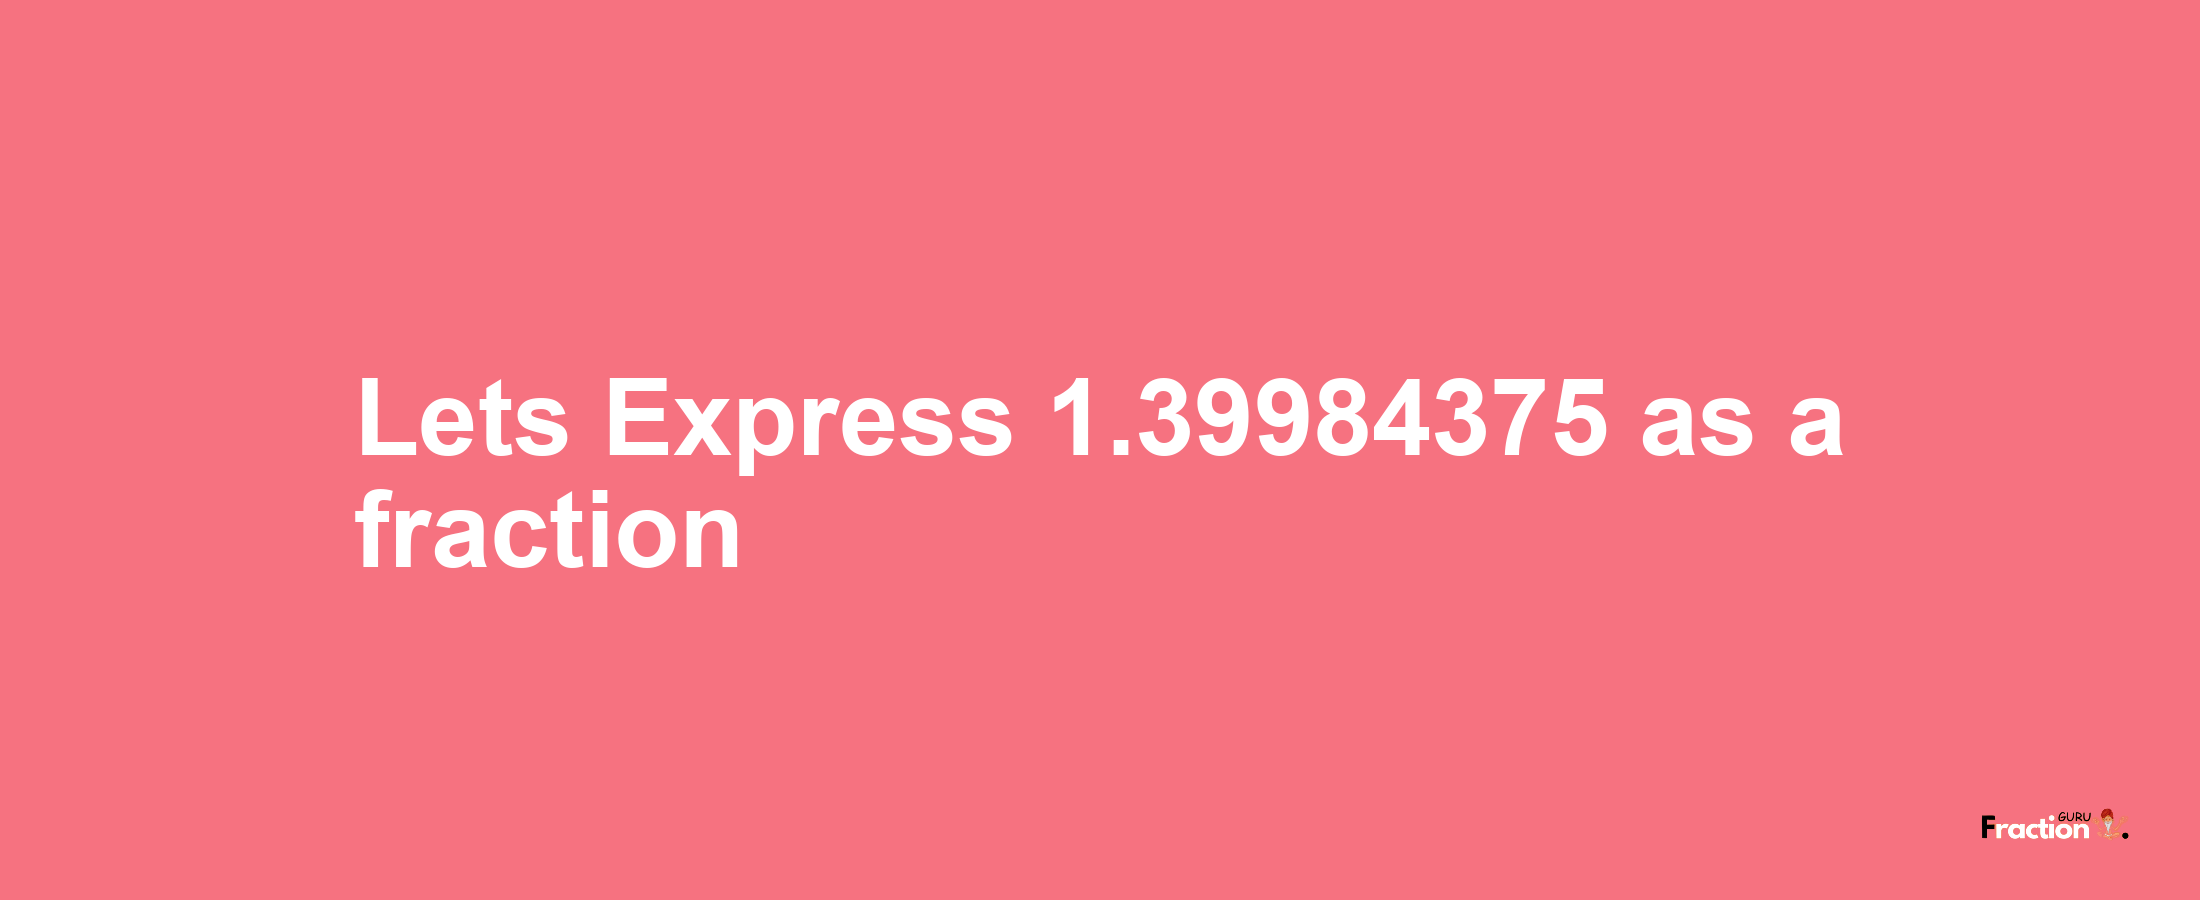 Lets Express 1.39984375 as afraction